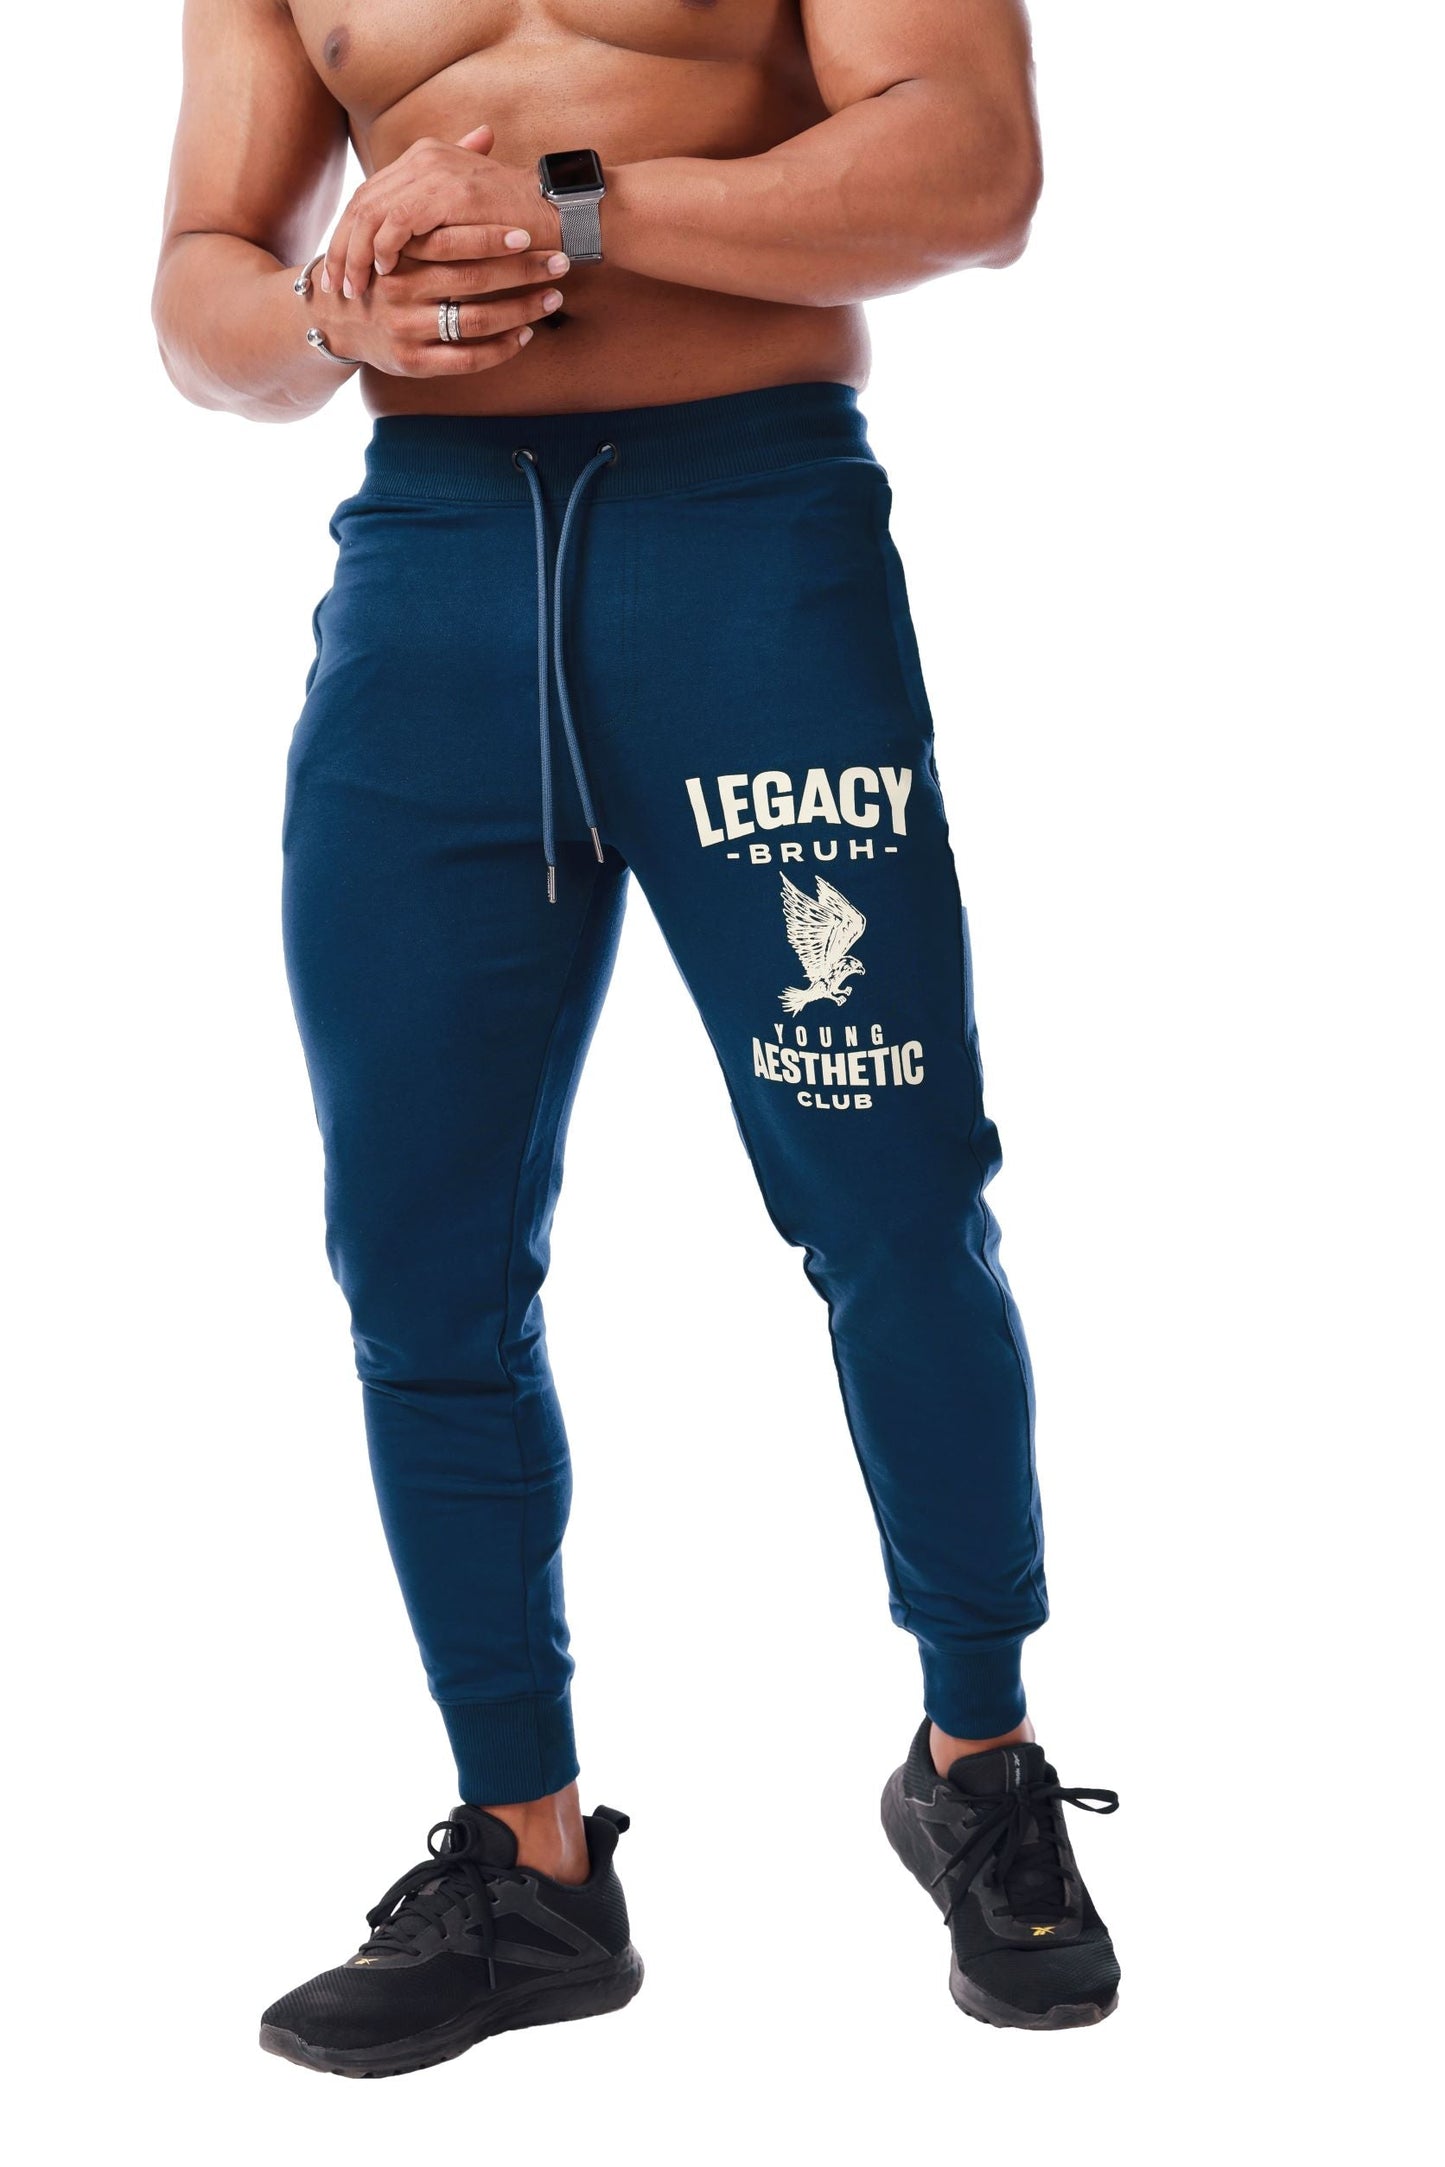 EAGLE JOGGERS TEAL - The Legacy Bruh